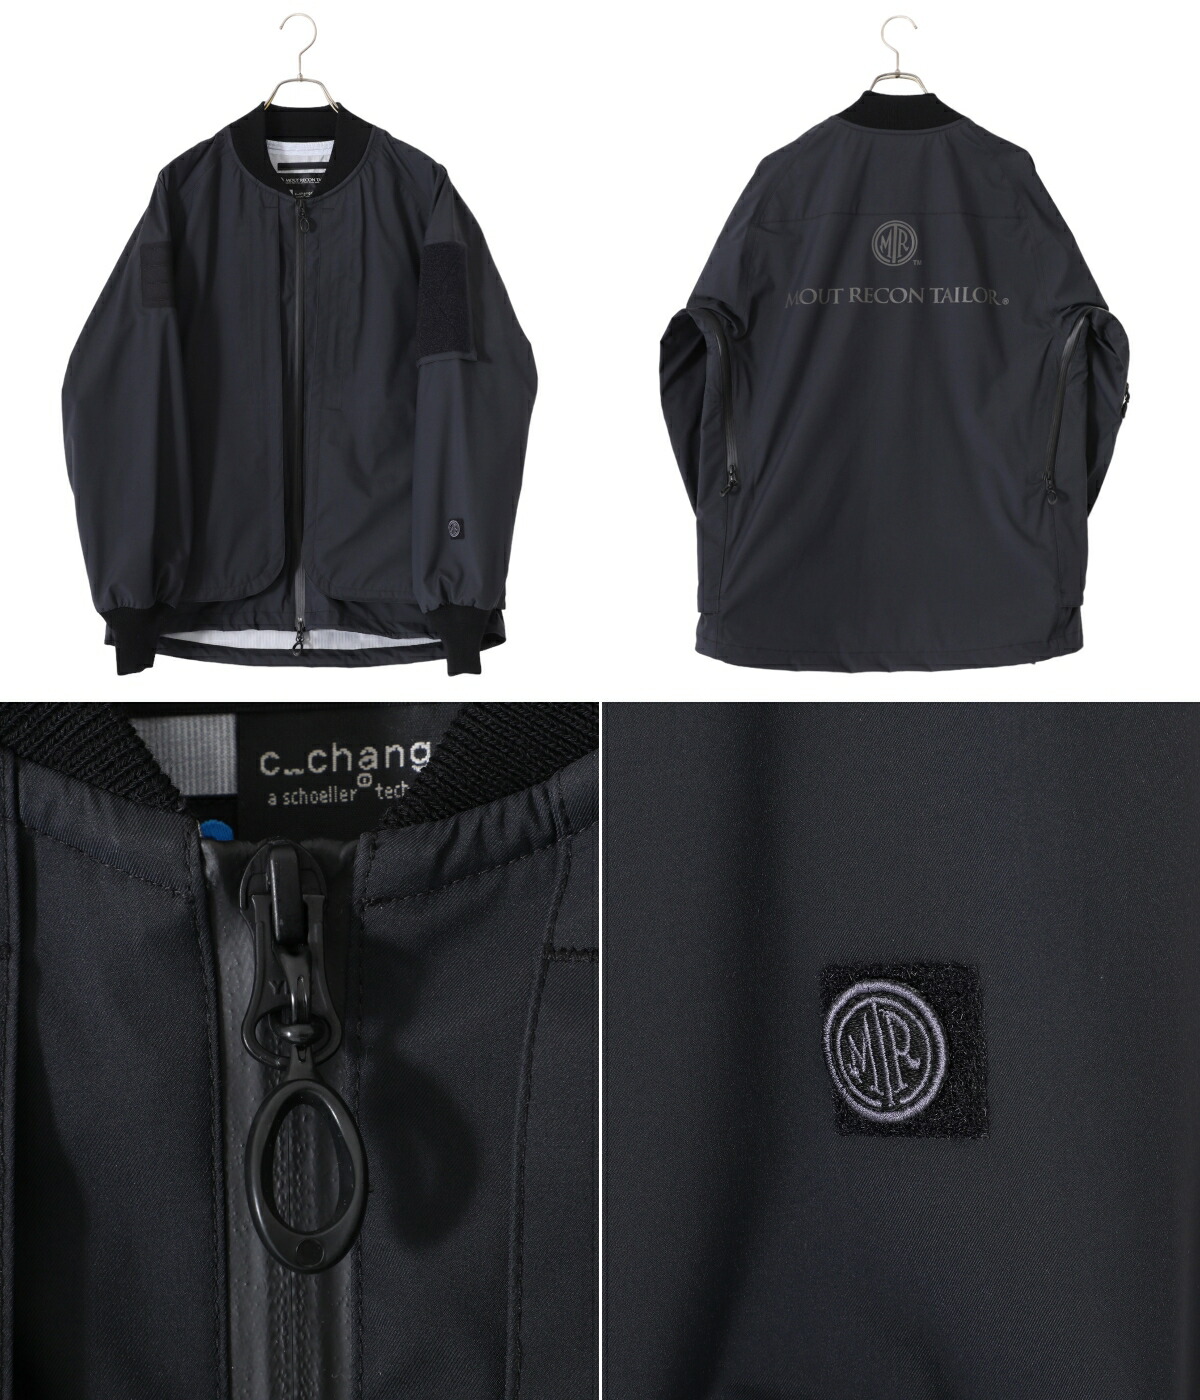 MOUT RECON TAILOR / マウトリーコンテーラー ： SHOOTING BOMBER HARD 